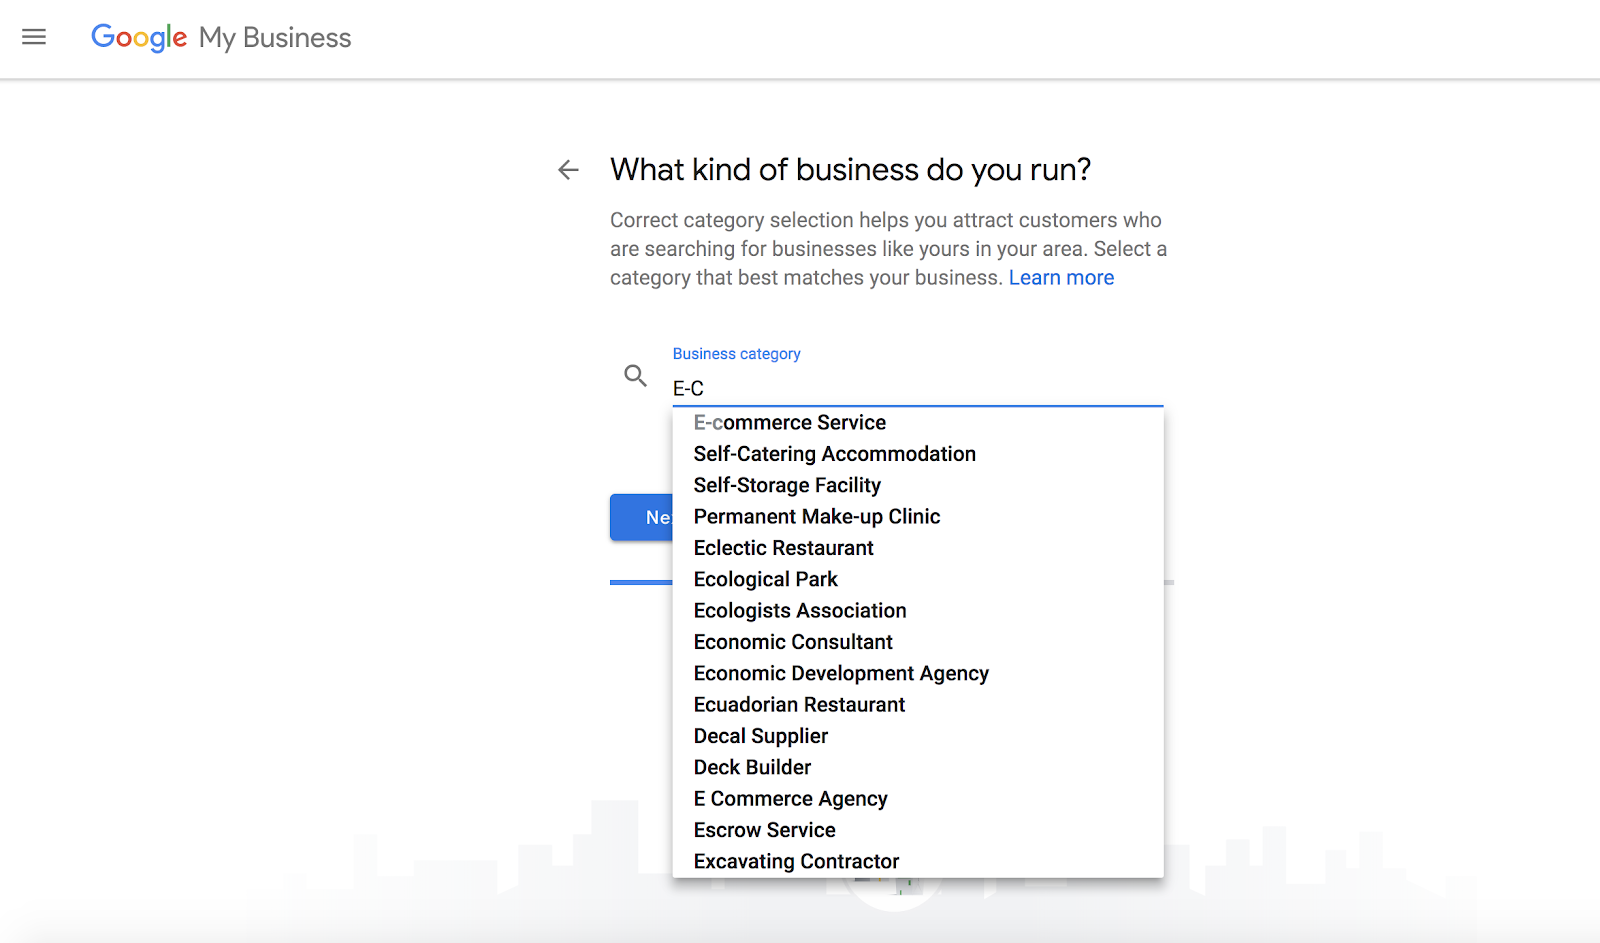 Example business categories for your google my business account